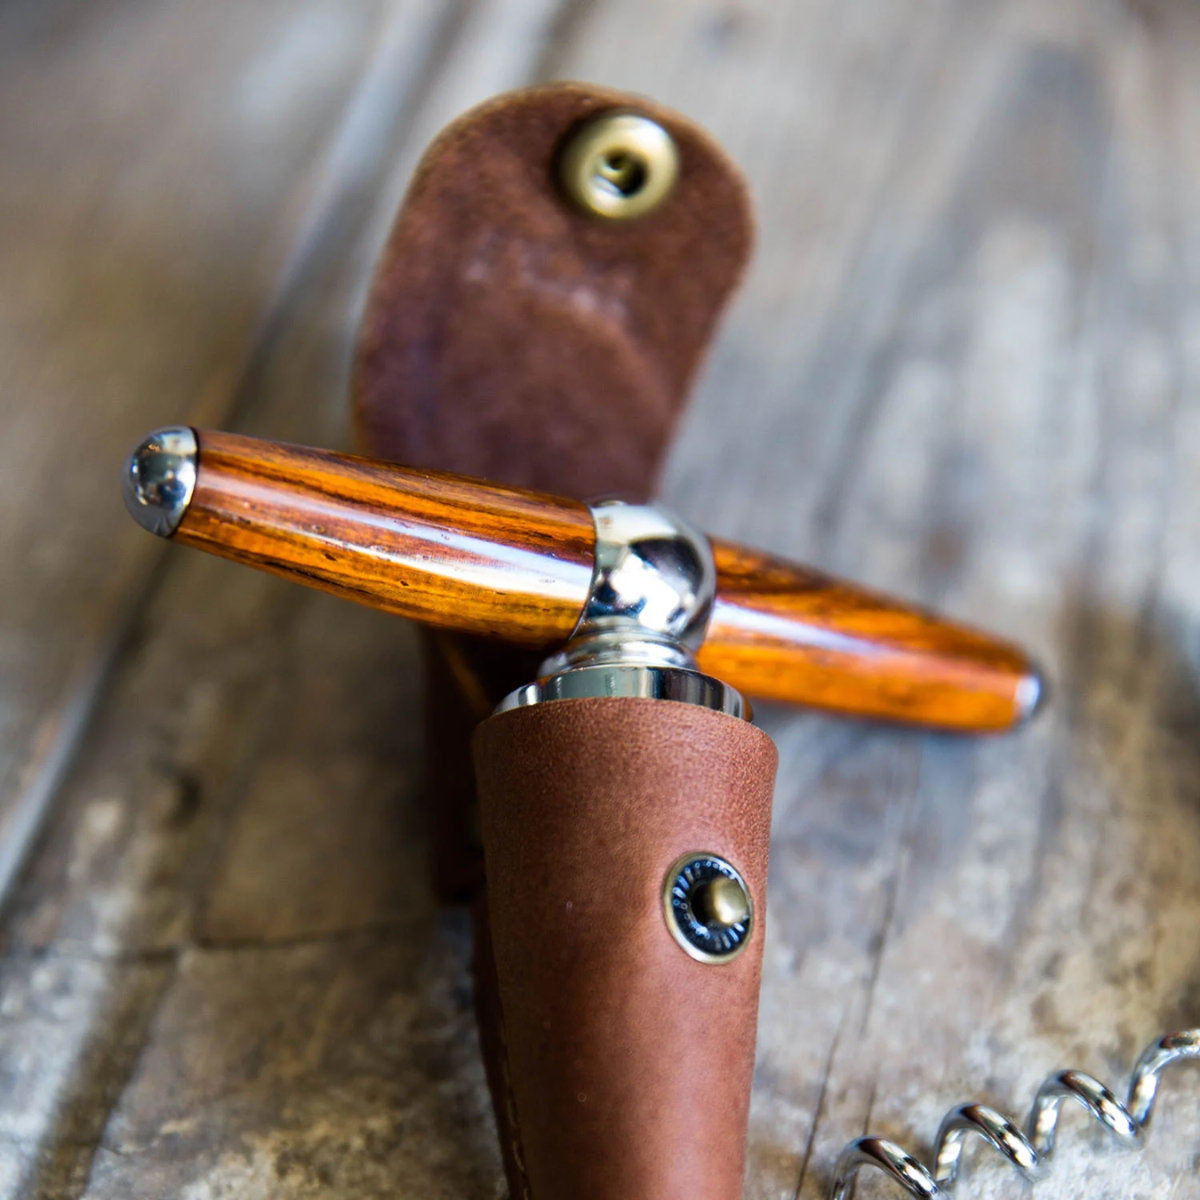 39. Toast to Three Years of Love with a Unique Leather Wine Bottle Stopper